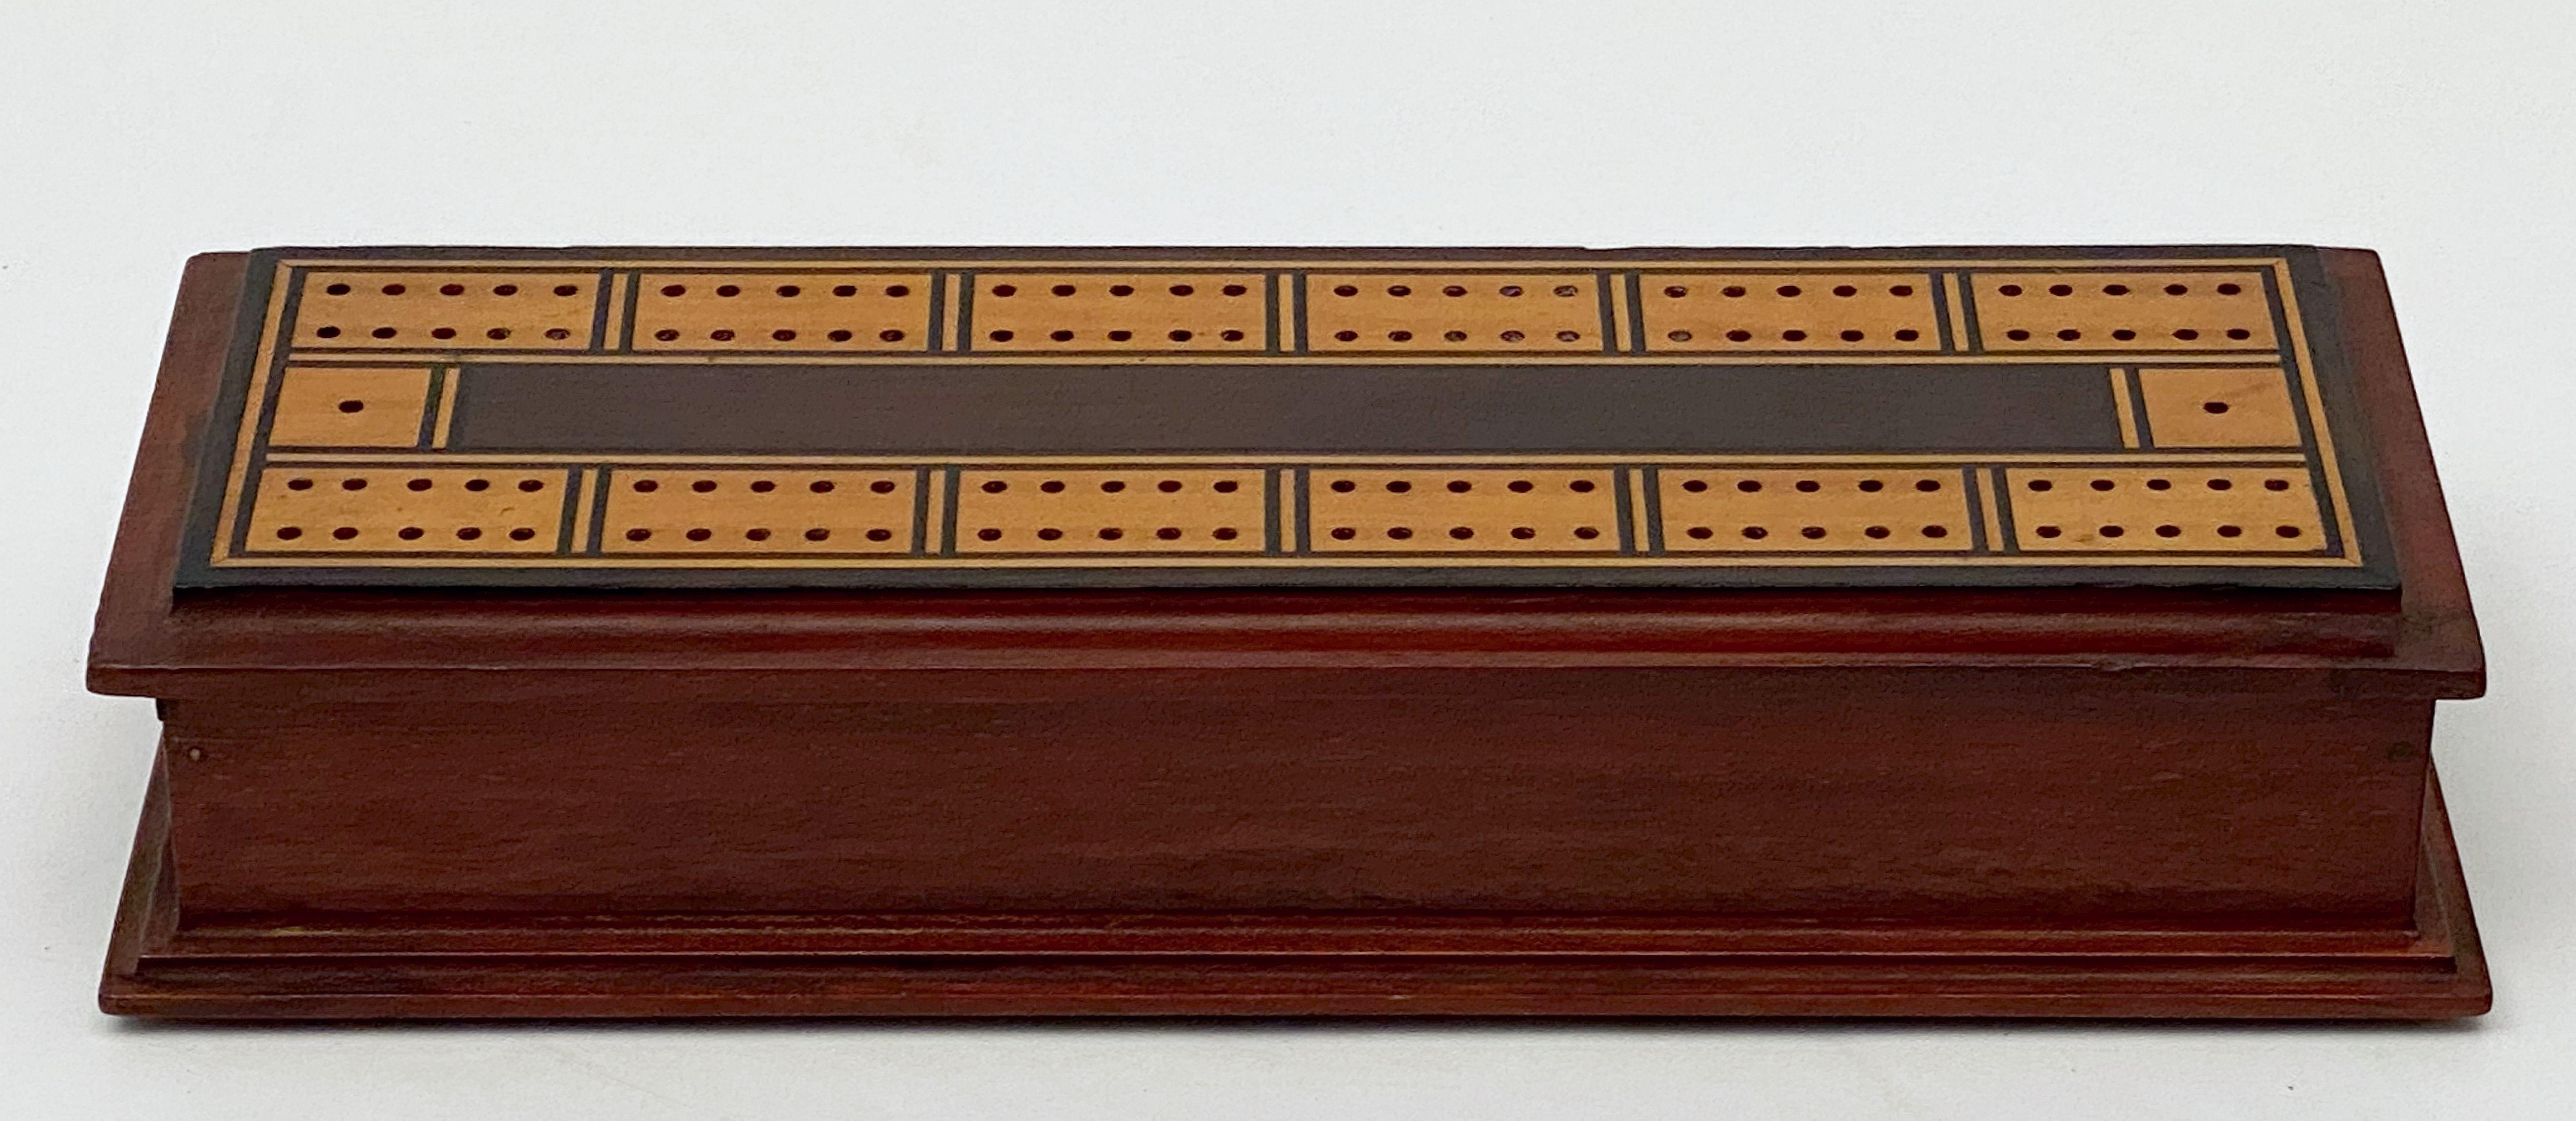 A fine English rectangular cribbage board or game box from the 19th century featuring a handsome contrasting inlay on the removable lid - the body of the box in mahogany, opening to a compartmentalized interior with four bone pegs. The underside of